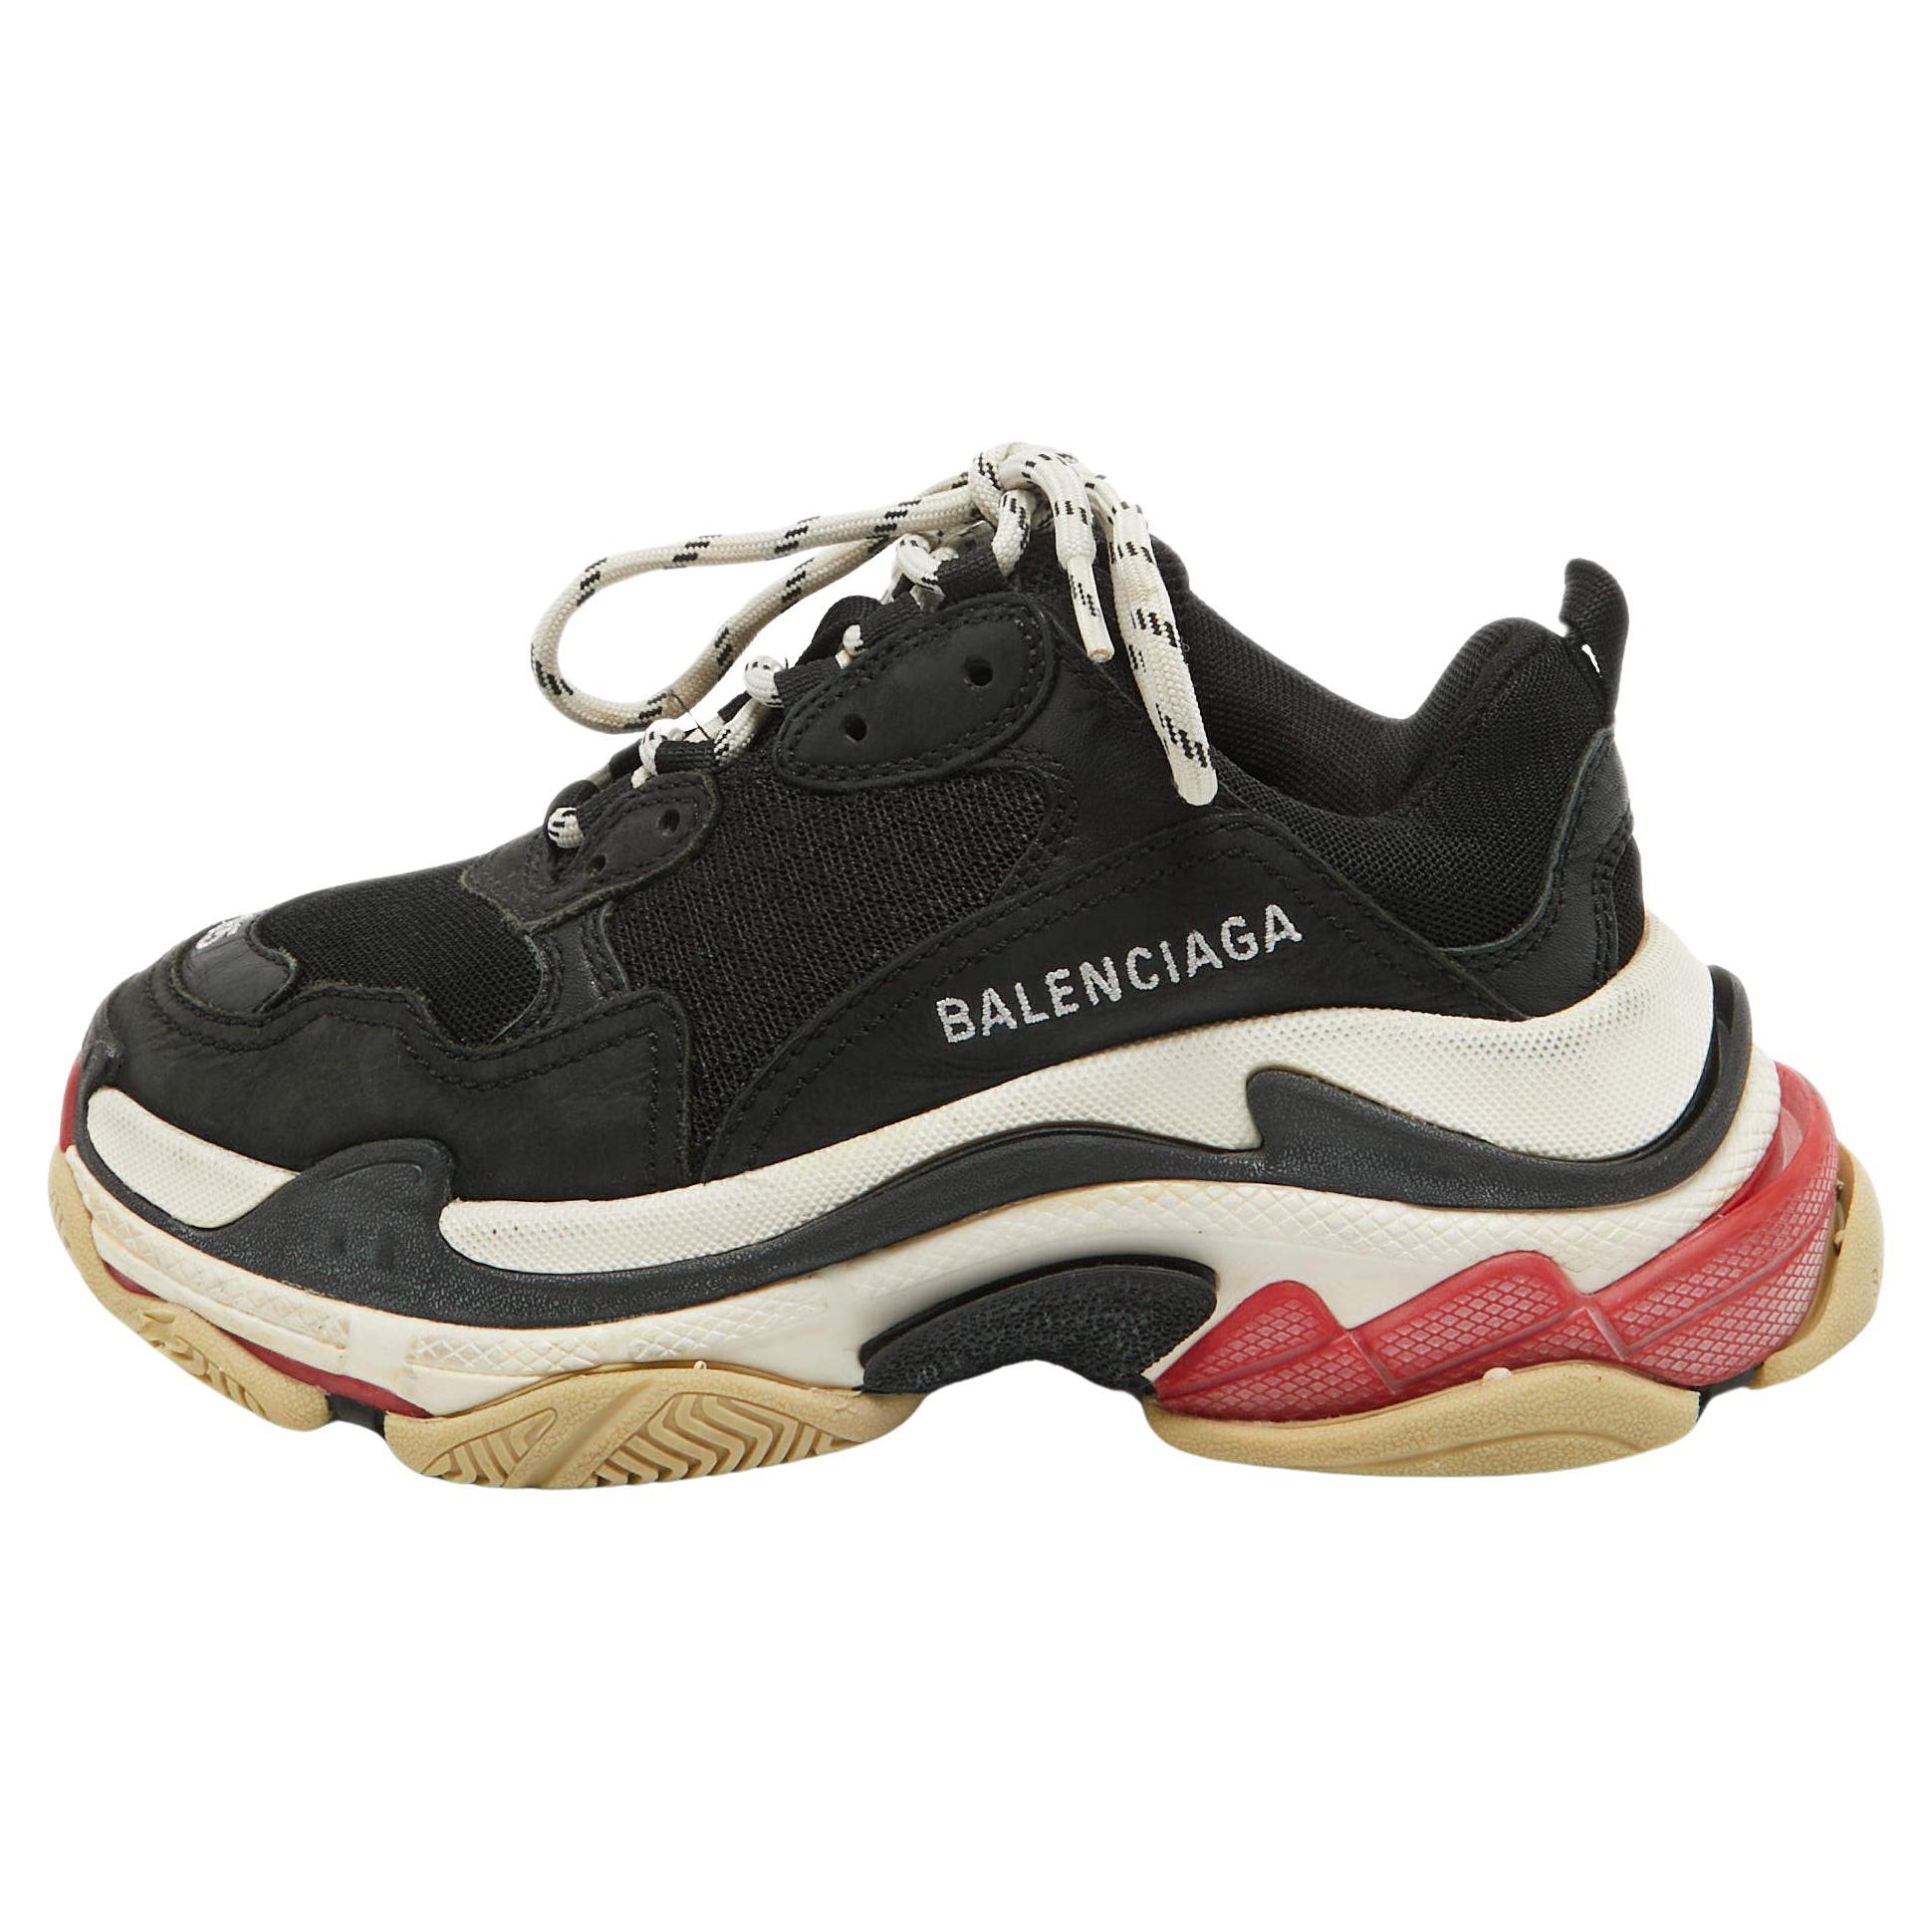 Balenciaga Black Mesh and Nubuck Leather Triple S Sneakers Size 35 For Sale